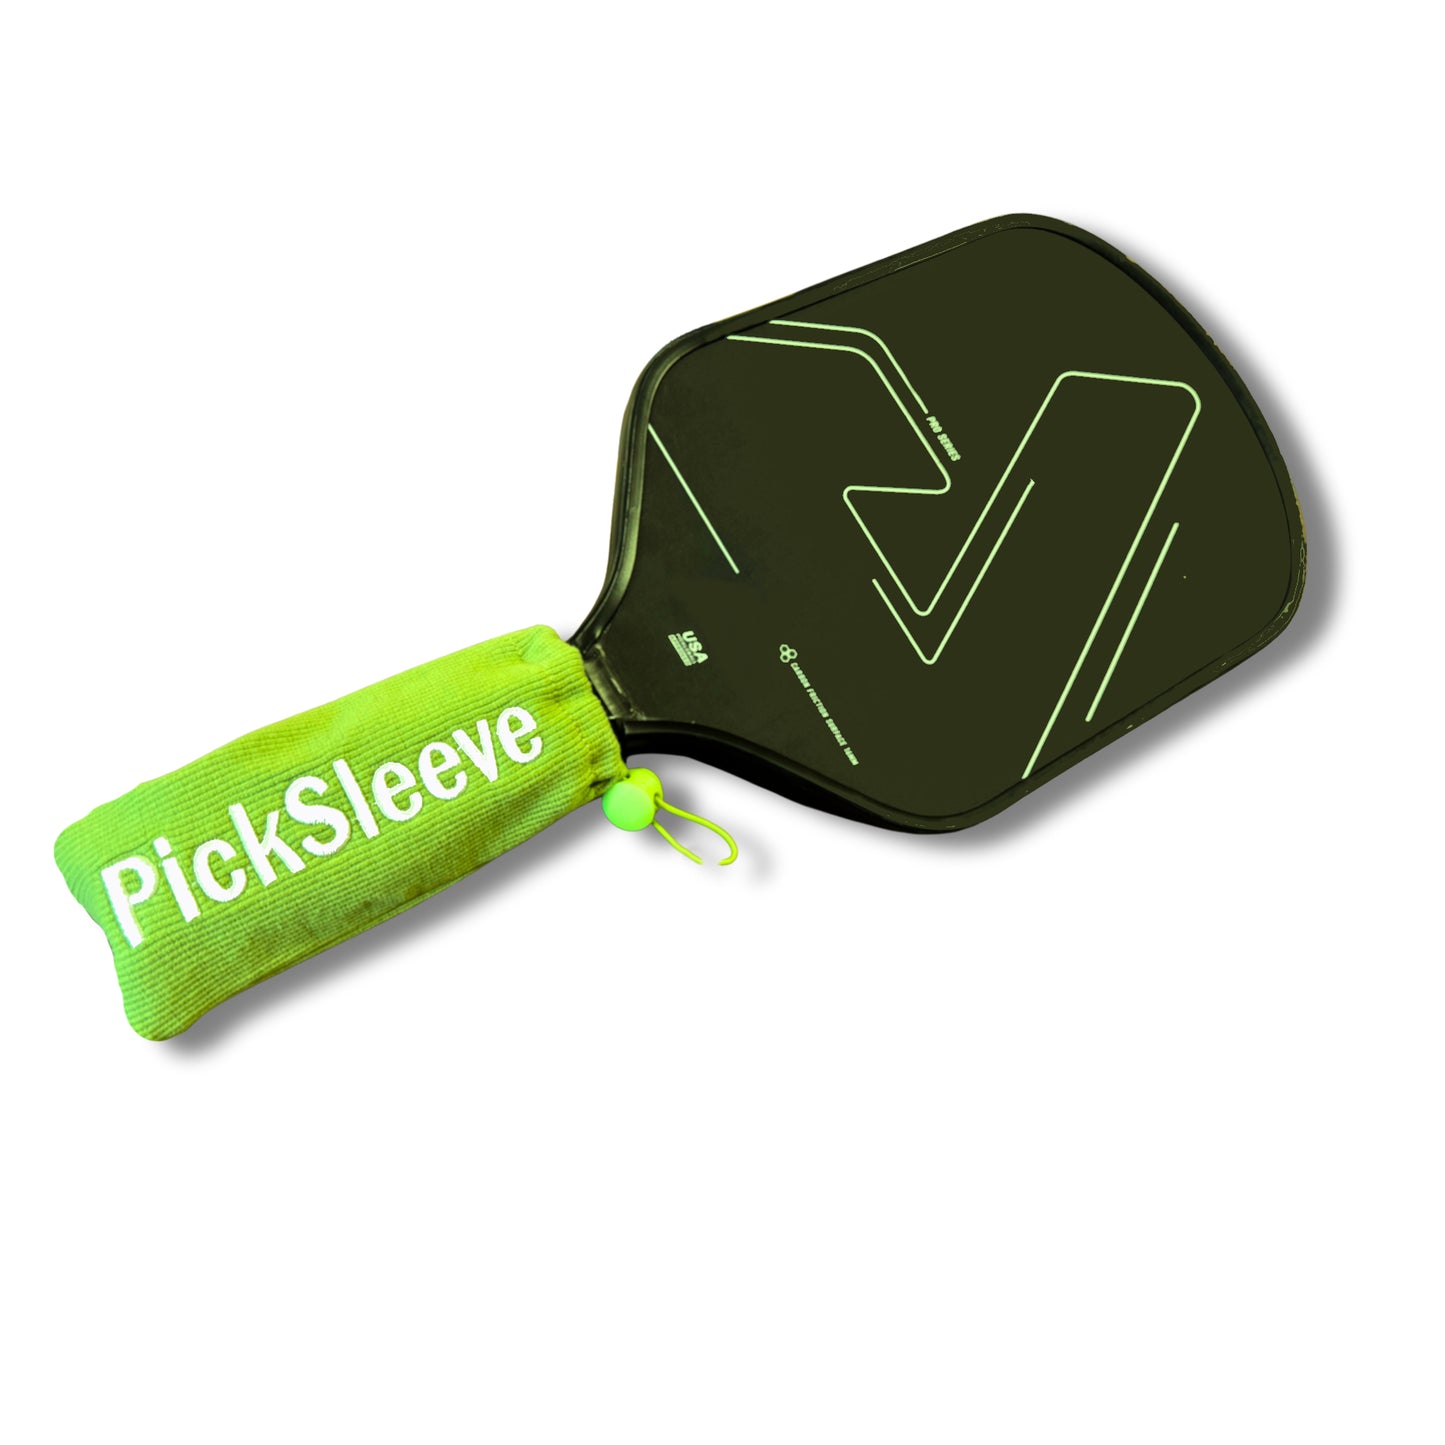 PickSleeve Pickleball Protective Handle Cover Sleeve